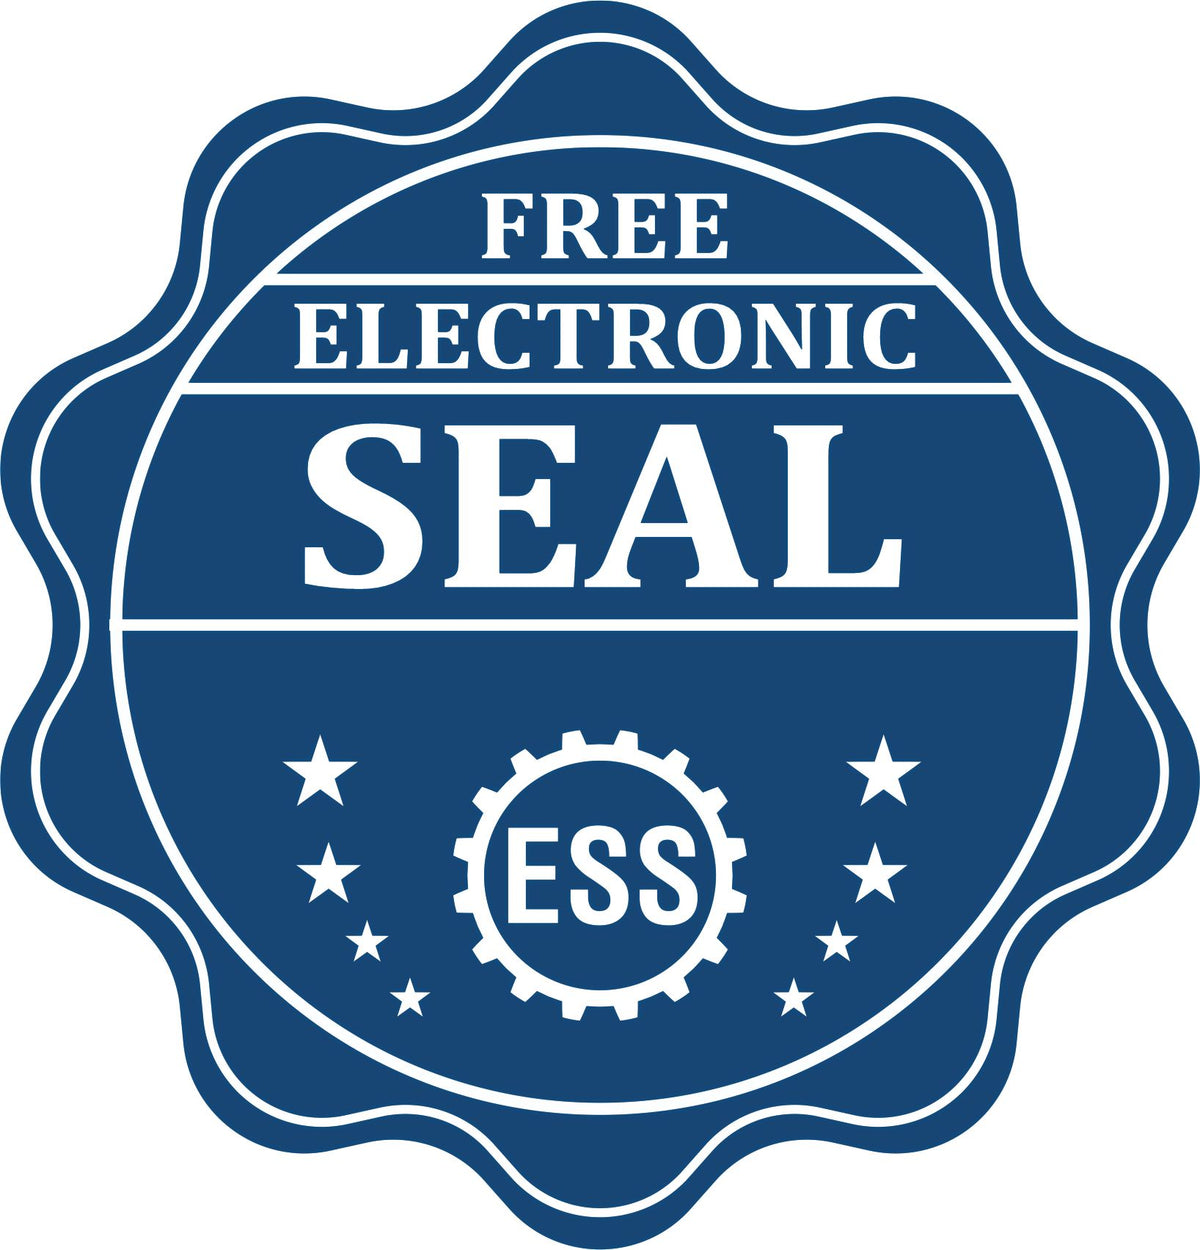 A badge showing a free electronic seal for the Handheld New Jersey Architect Seal Embosser with stars and the ESS gear on the emblem.